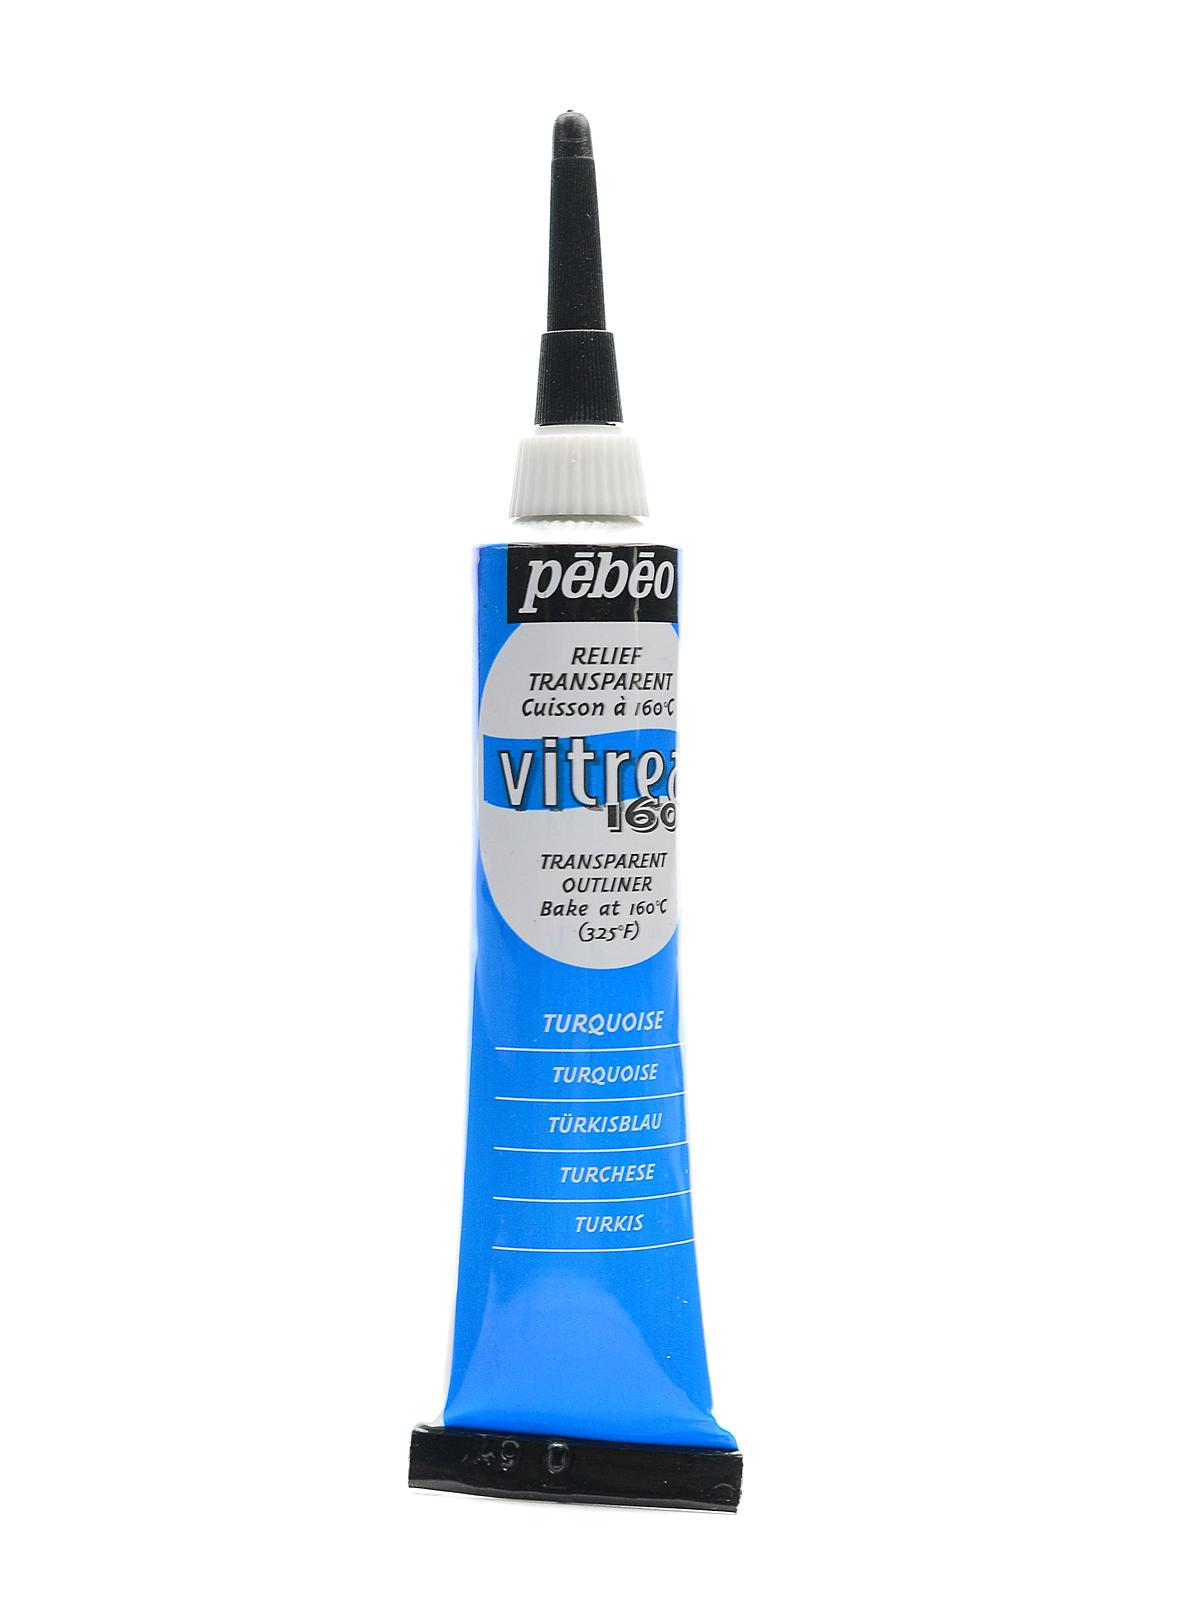 Vitrea 160 Outliners Turquoise 20 Ml